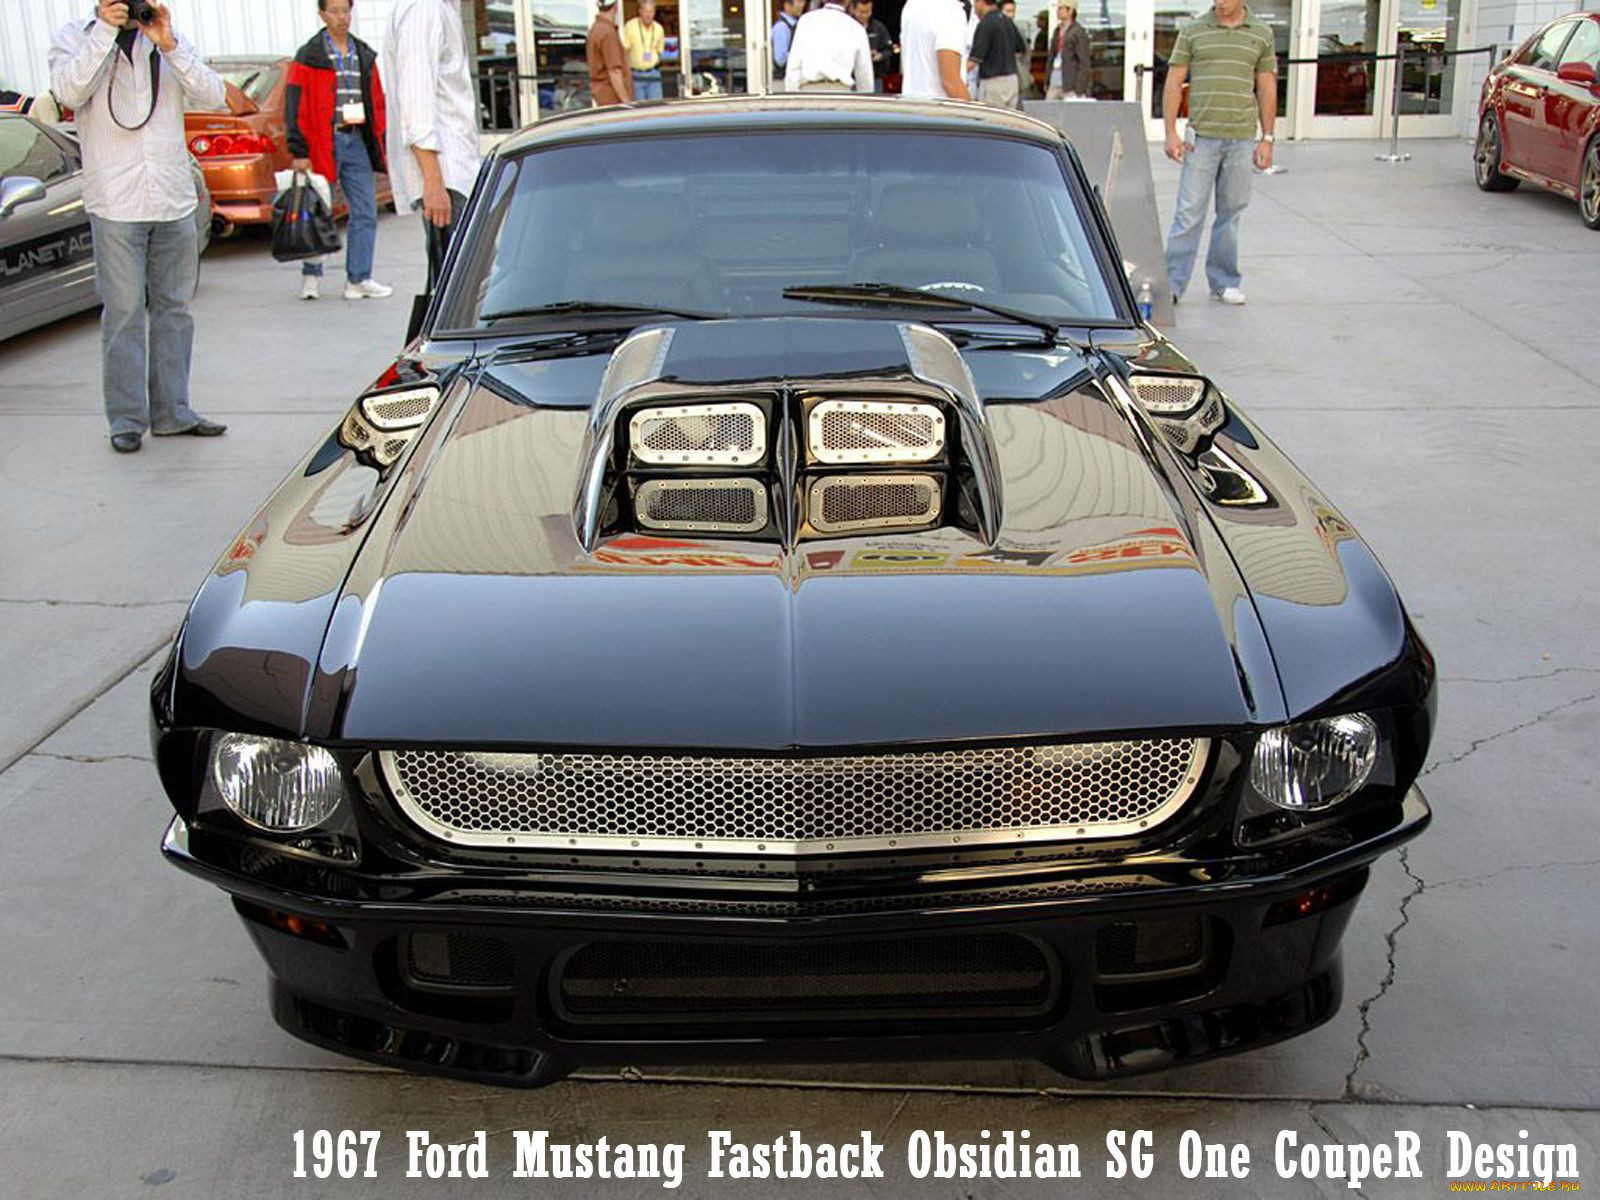 Ford Mustang Obsidian SG-one 1967